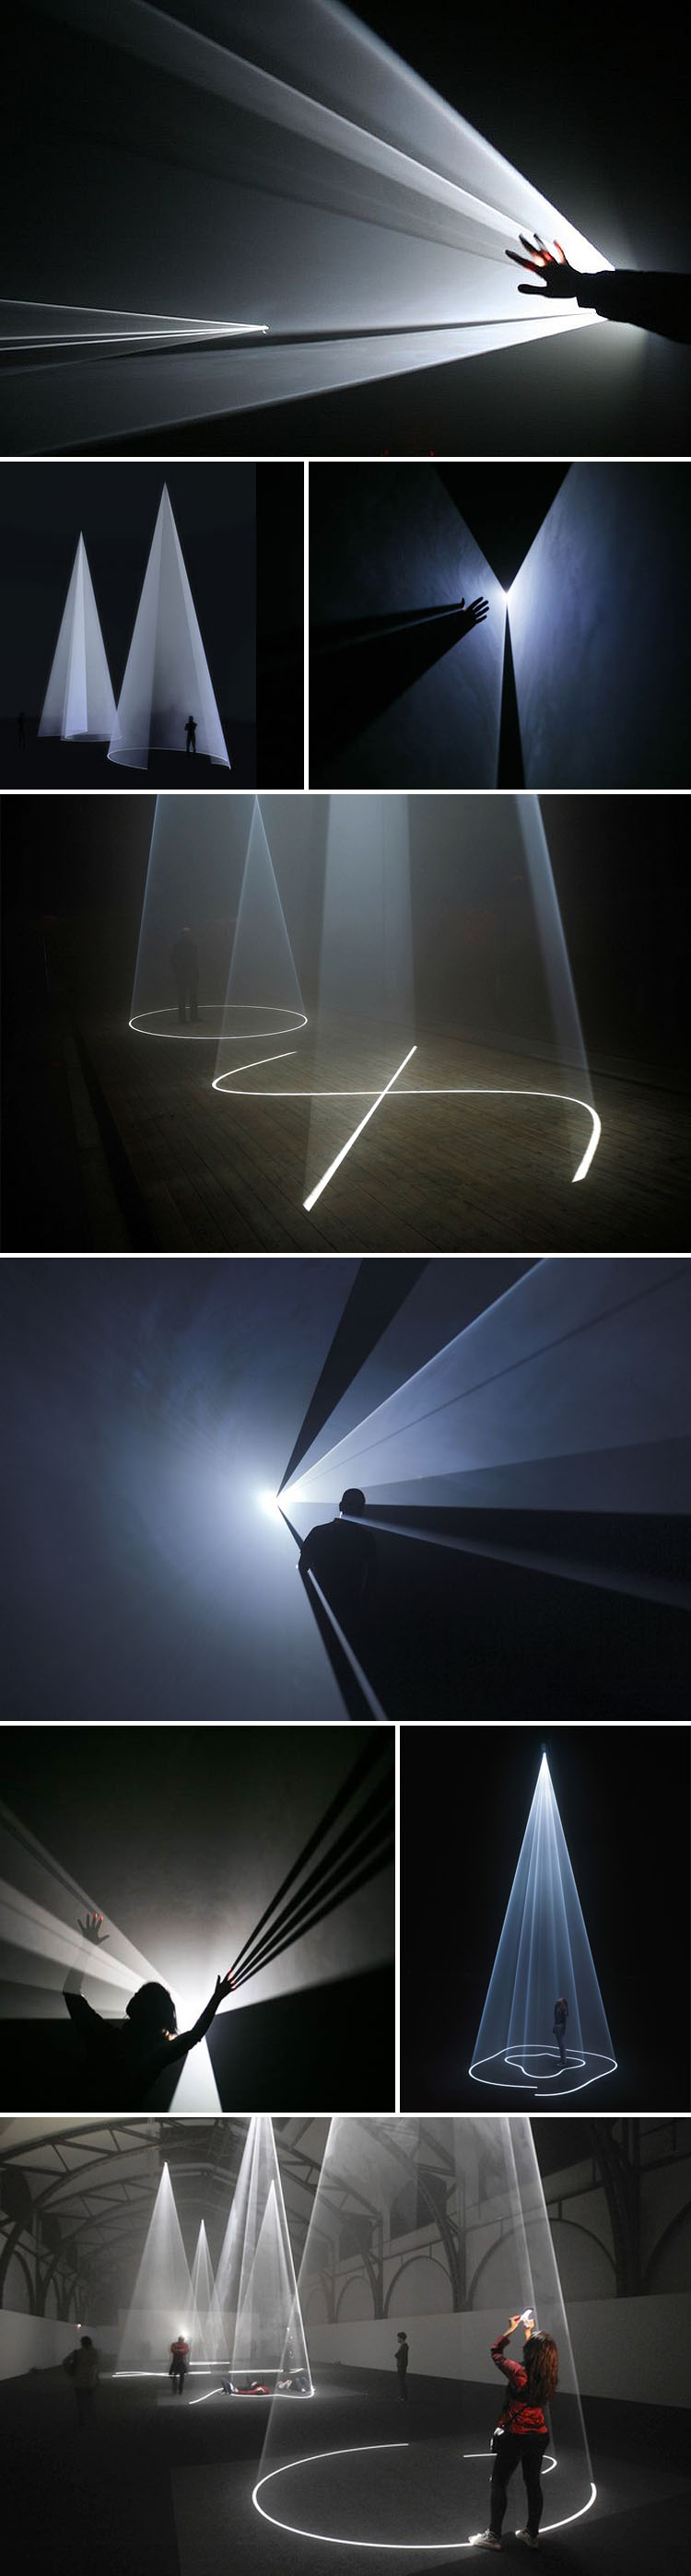 anthony_mccall_hamburger-bahnof_light-sculptures_five-minutes-of-pure-sculpture-collabcubed